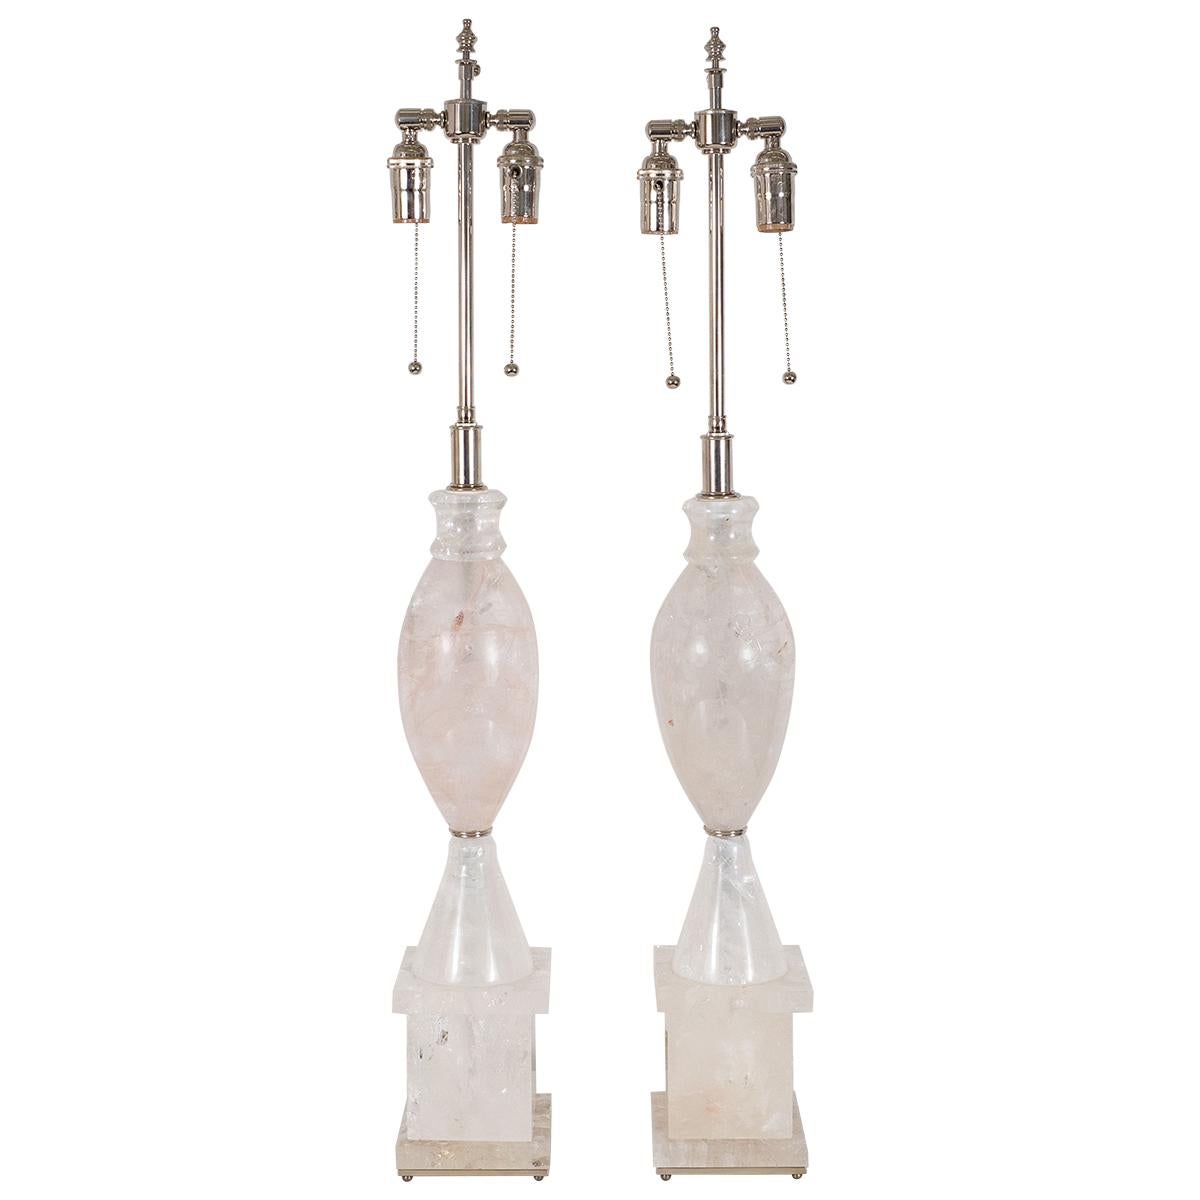 Pair of rock crystal urn shaped table lamps with nickel hardware.